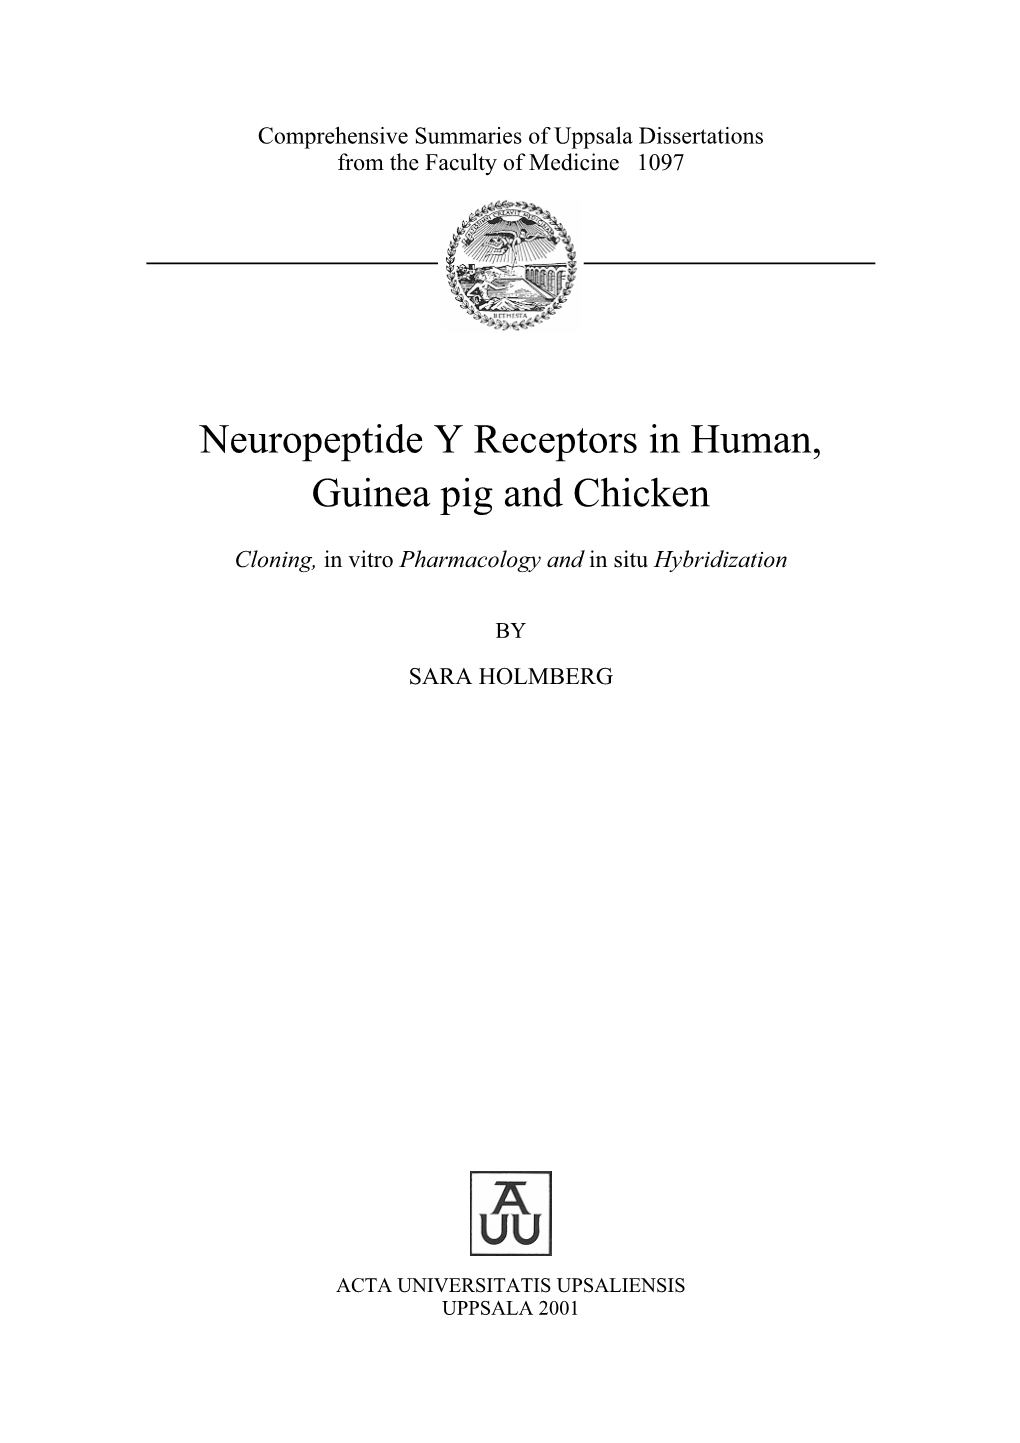 Neuropeptide Y Receptors in Human, Guinea Pig and Chicken